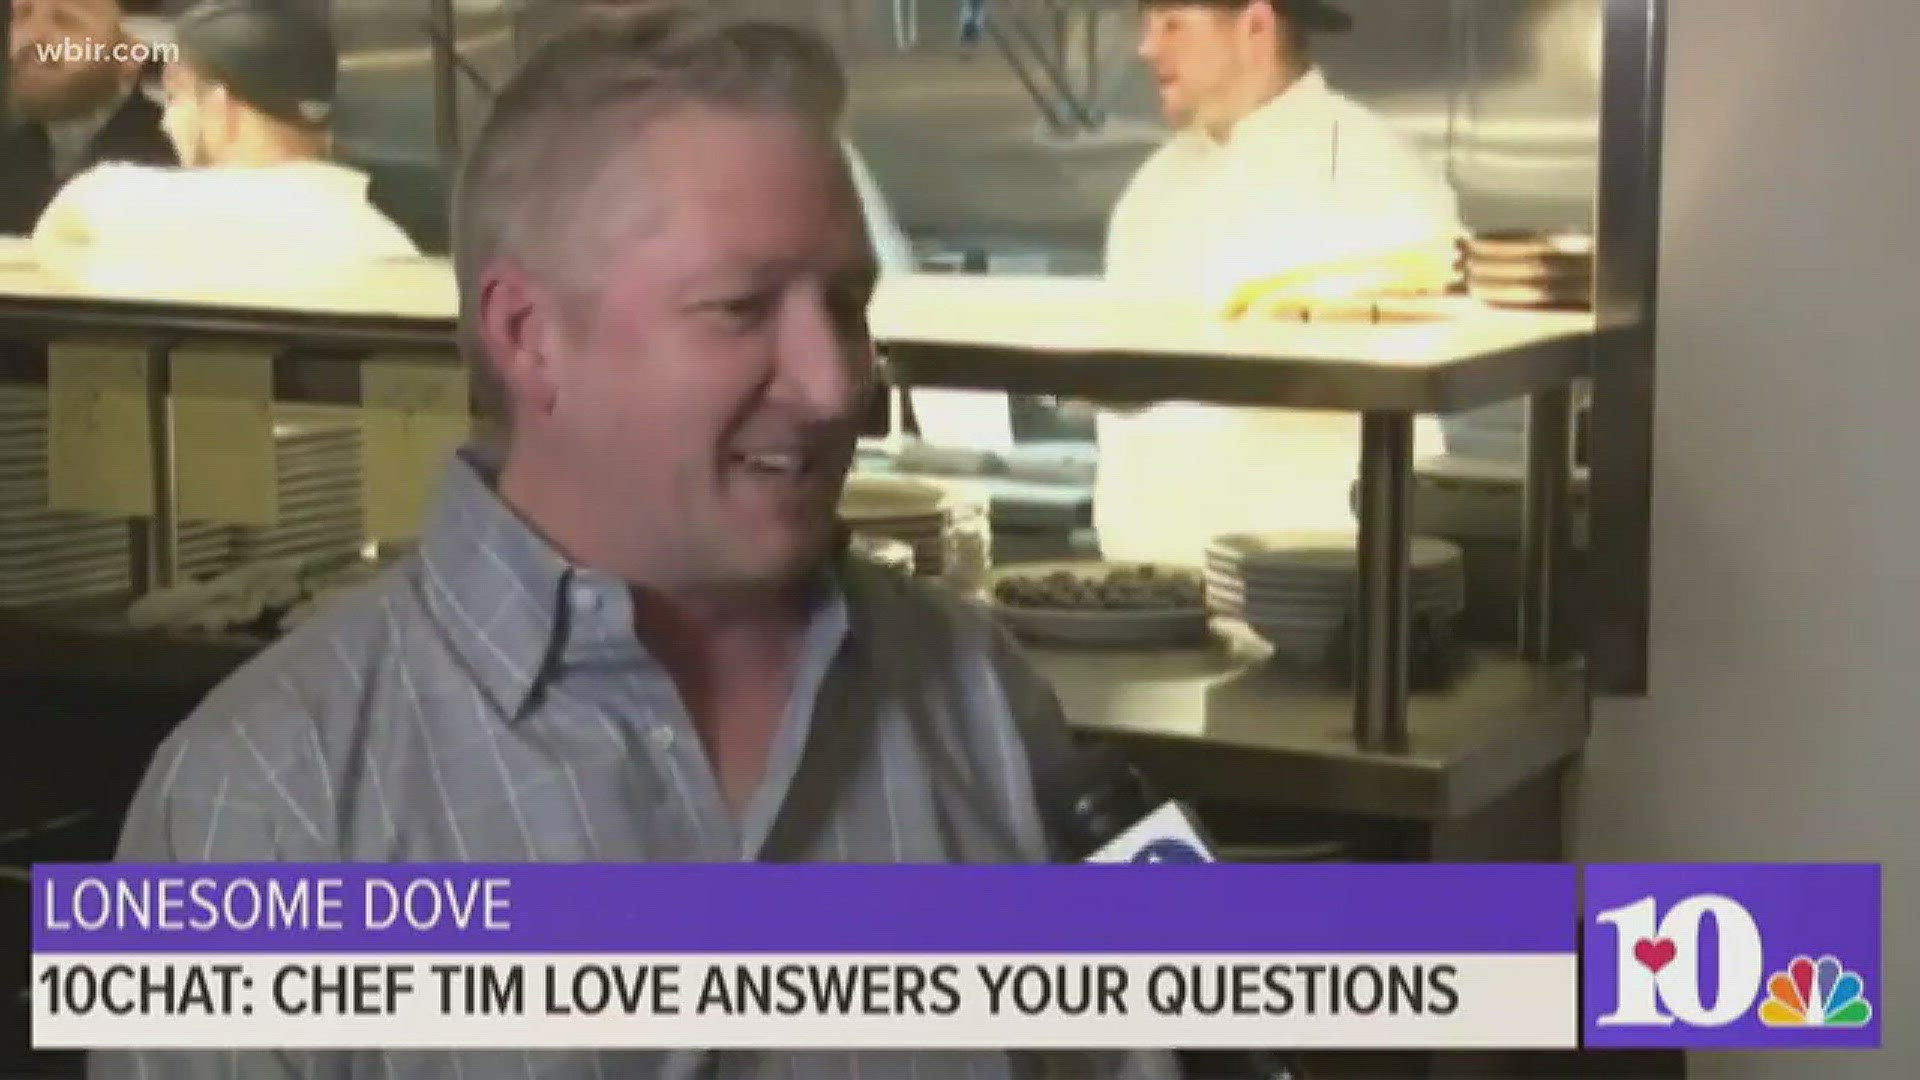 Feb. 16, 2018: Chef Tim Love joined us for a 10Chat to talk about his life inside and outside the kitchen.